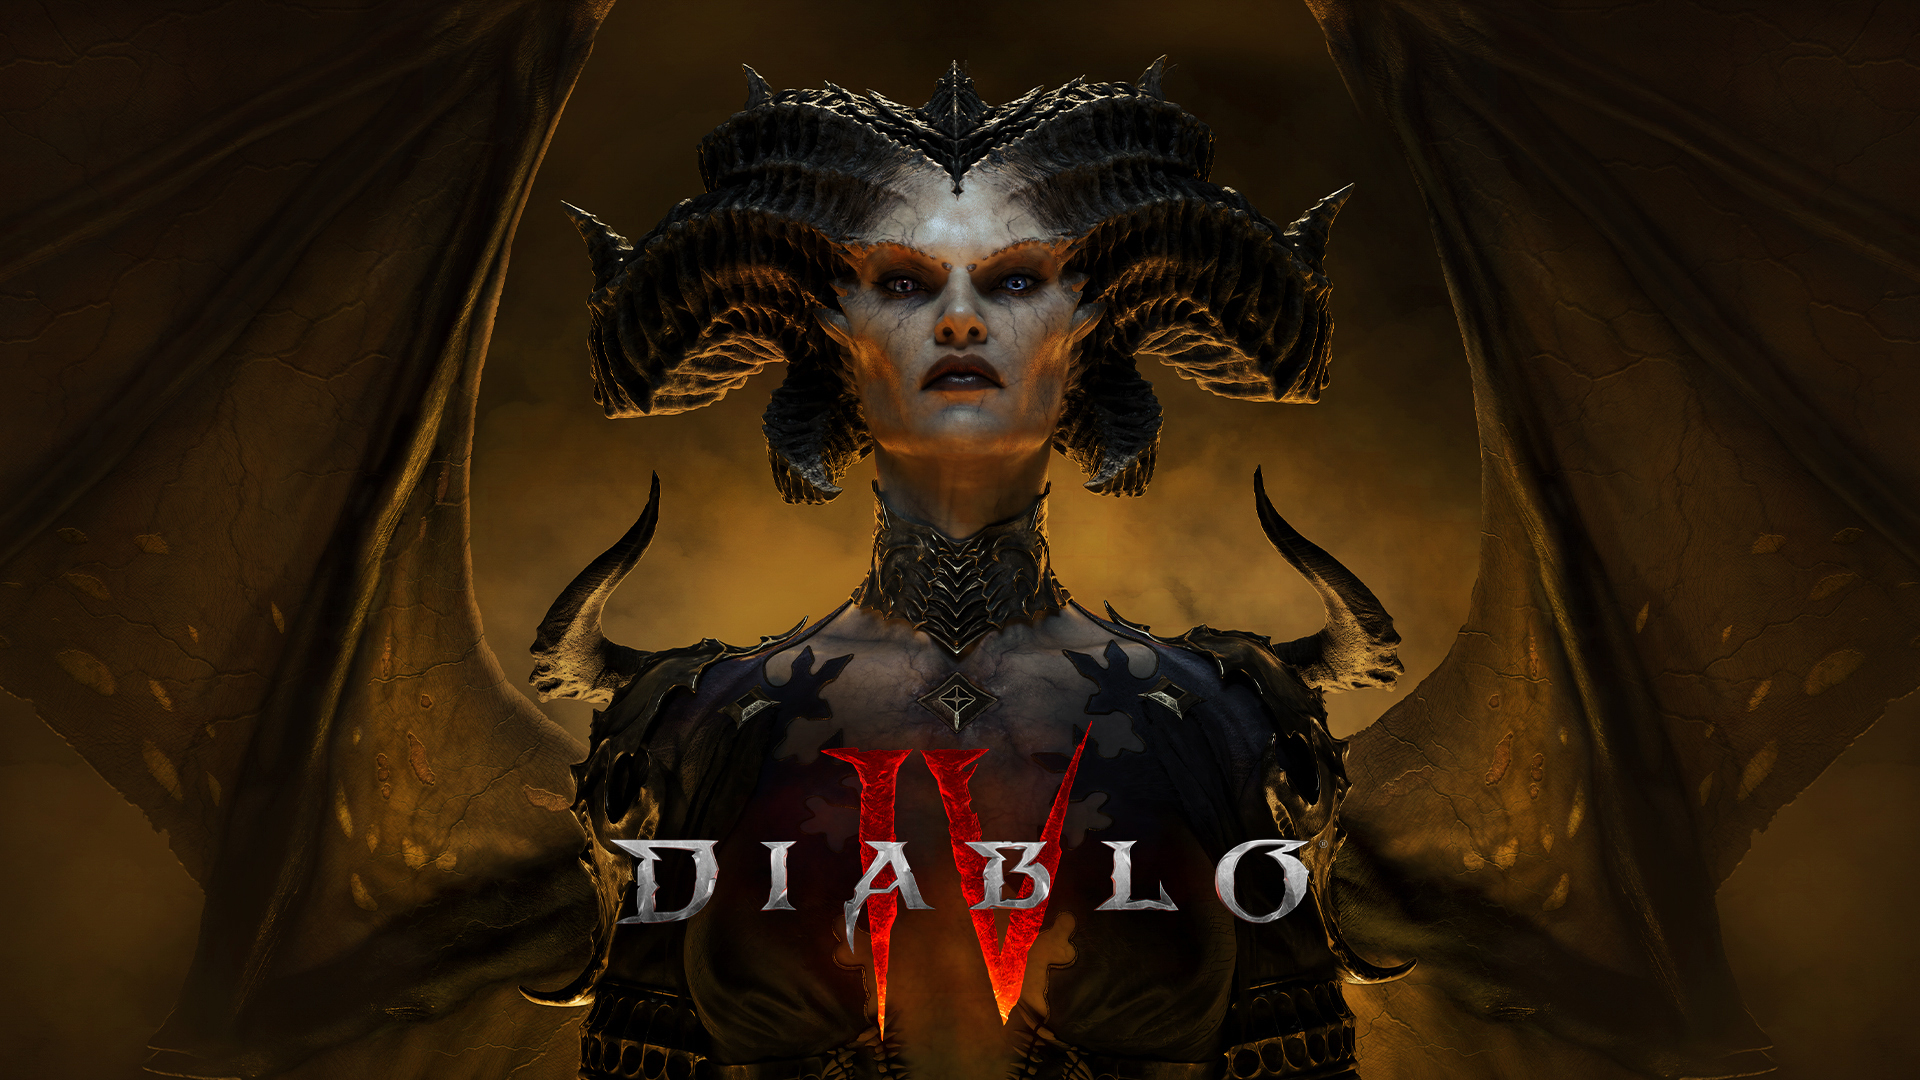 Play Diablo IV Today With the Ultimate Edition - and Find Out